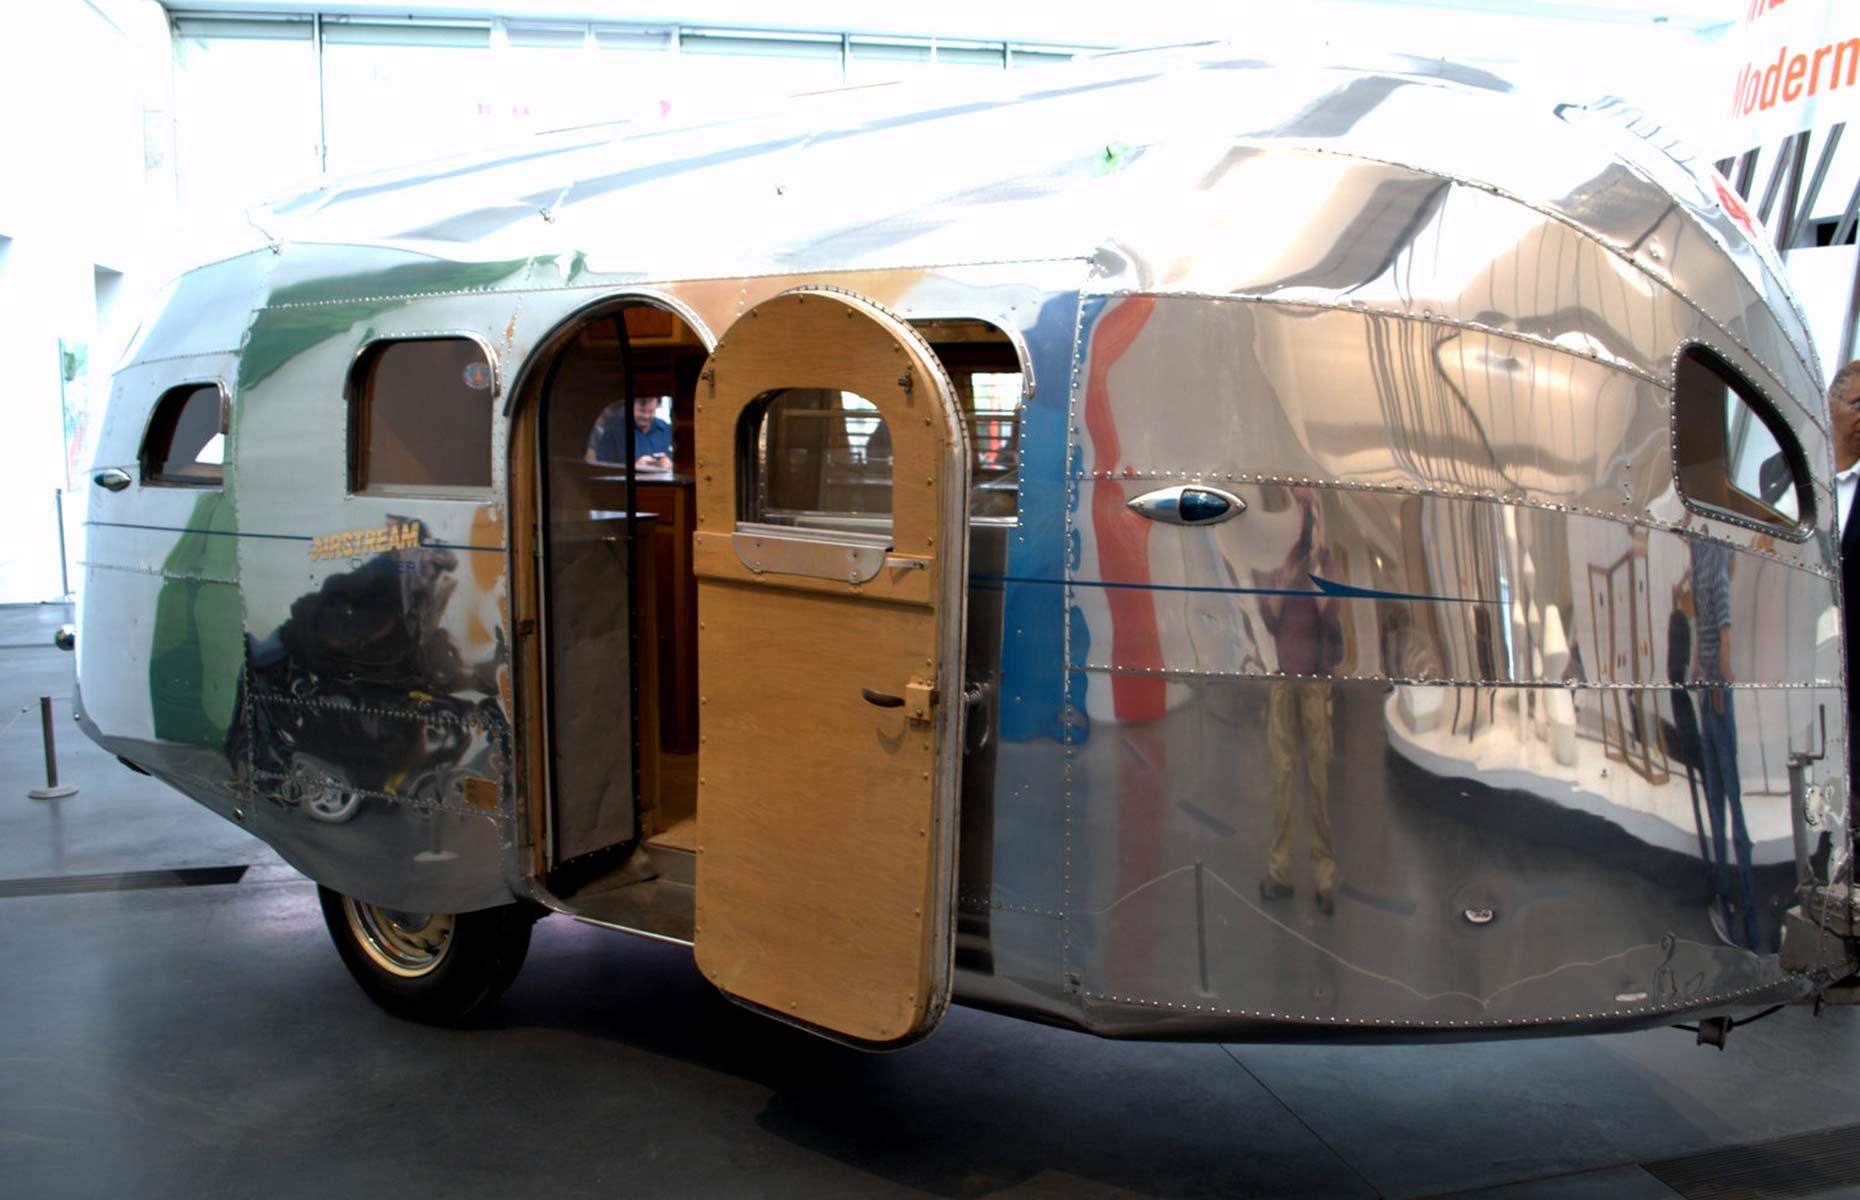 <p>During the early 30s, William Hawley Bowlus, an engineer who had worked on Charles Lindbergh's famous Spirit of St. Louis airplane, created the Road Chief, an aerodynamic Streamline Moderne-style trailer in gleaming aluminum. Bowlus' aircraft-inspired RVs failed to sell. In 1936 Byam stepped in, buying up Bowlus' inventory. Byam reconfigured the Road Chief, creating the iconic Airstream Clipper, pictured here, and put his marketing and advertising skills to good use.</p>